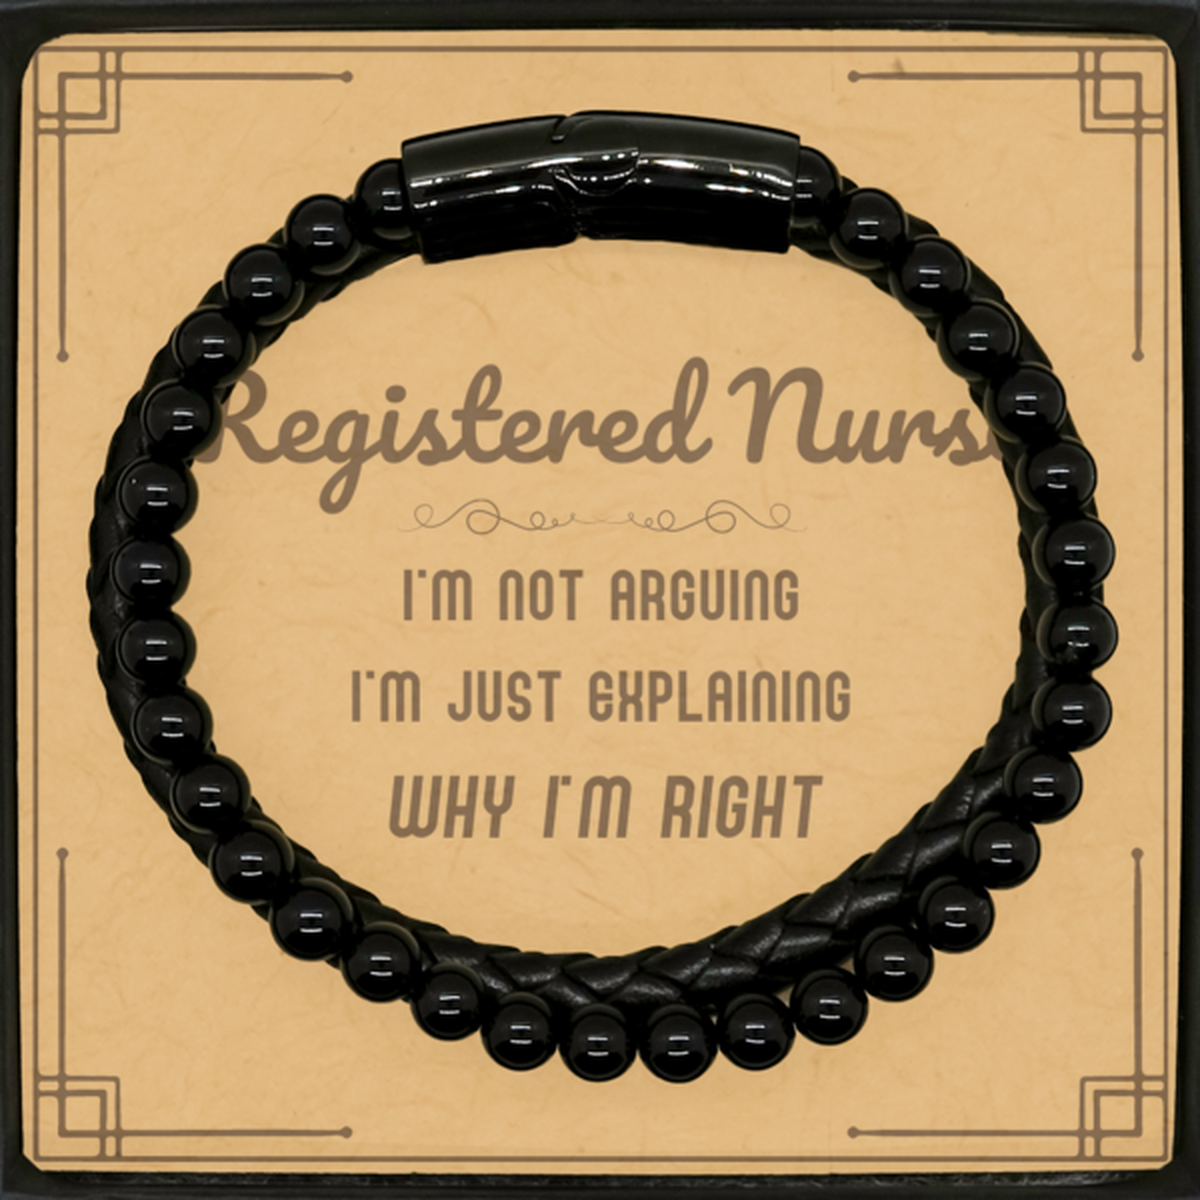 Registered Nurse I'm not Arguing. I'm Just Explaining Why I'm RIGHT Stone Leather Bracelets, Funny Saying Quote Registered Nurse Gifts For Registered Nurse Message Card Graduation Birthday Christmas Gifts for Men Women Coworker